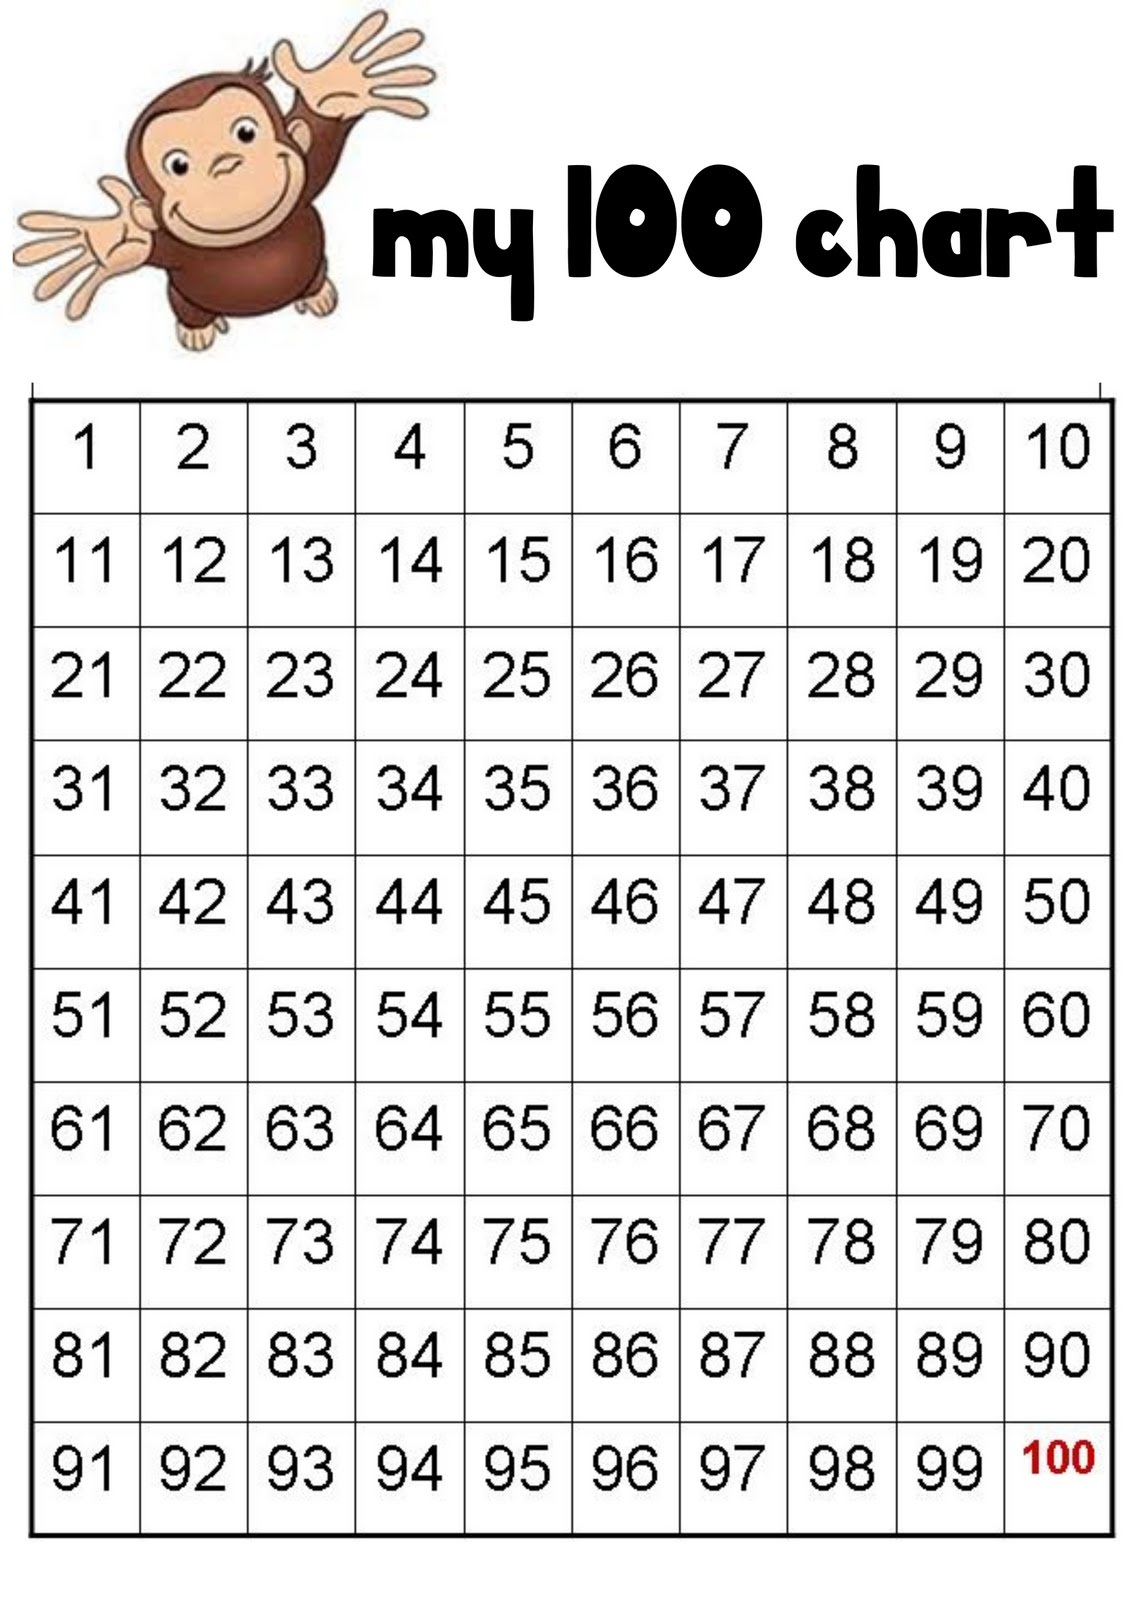 printable-number-chart-1-100-activity-shelter-printable-1-100-number-charts-activity-shelter